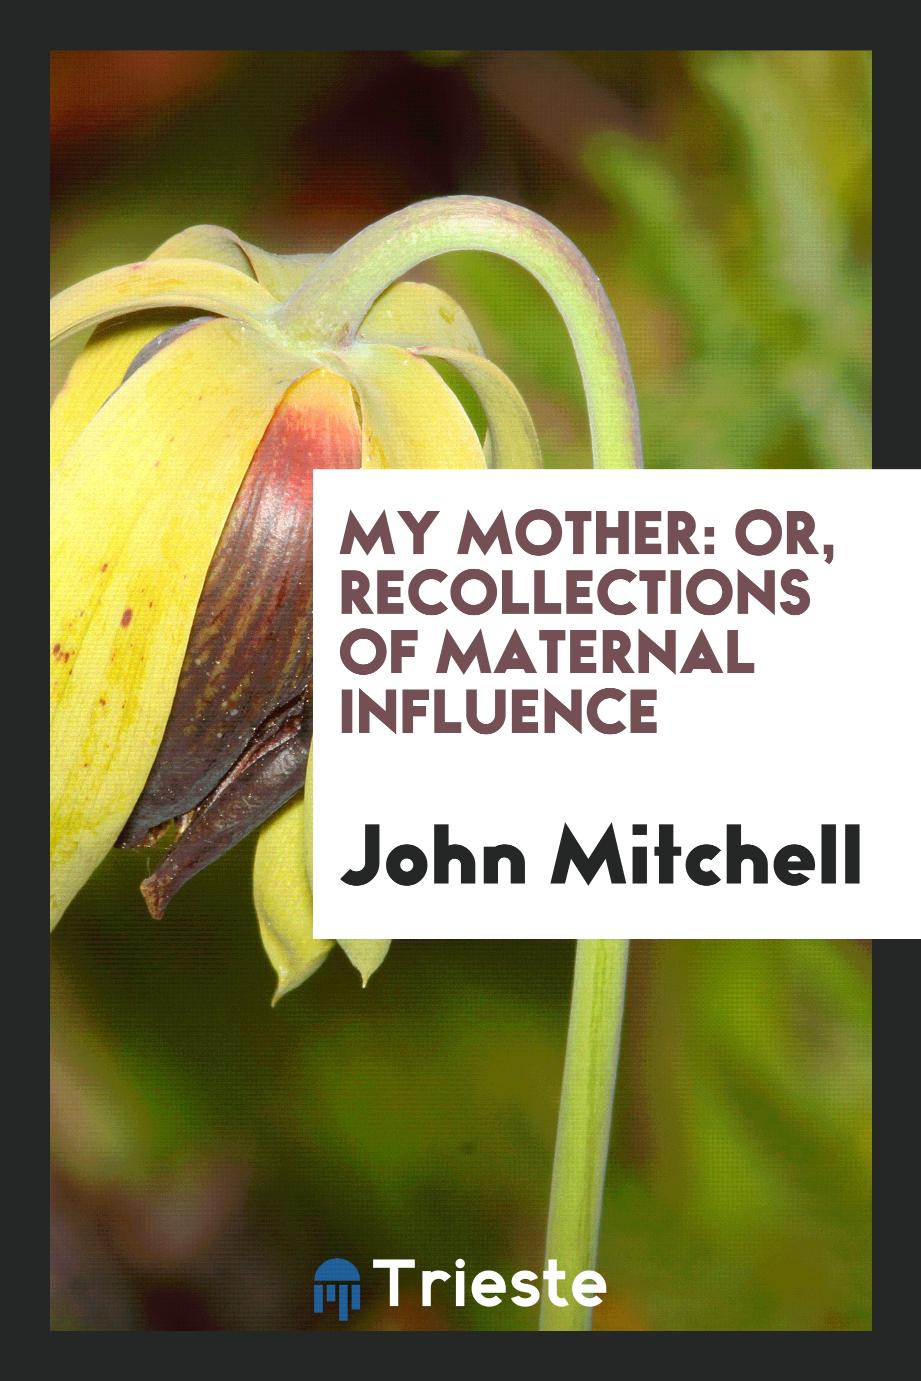 My mother: or, Recollections of maternal influence